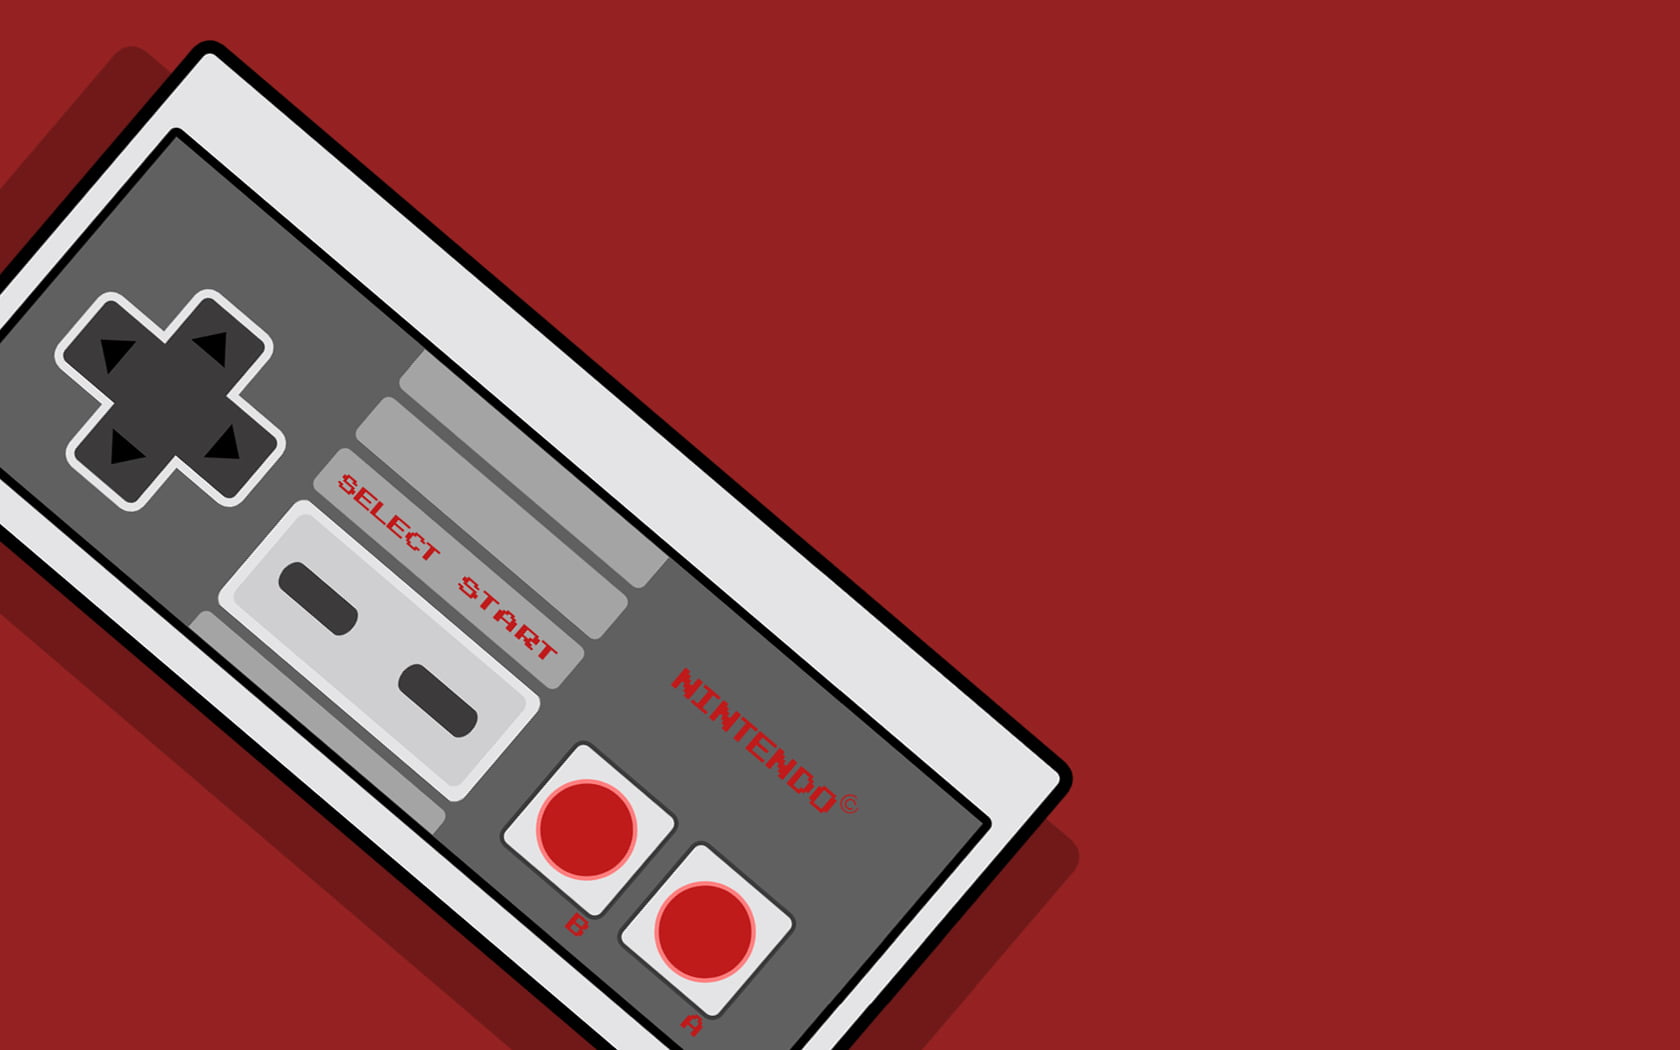 gray and white Nintendo game controller illustration, Nintendo, video games, consoles, vintage